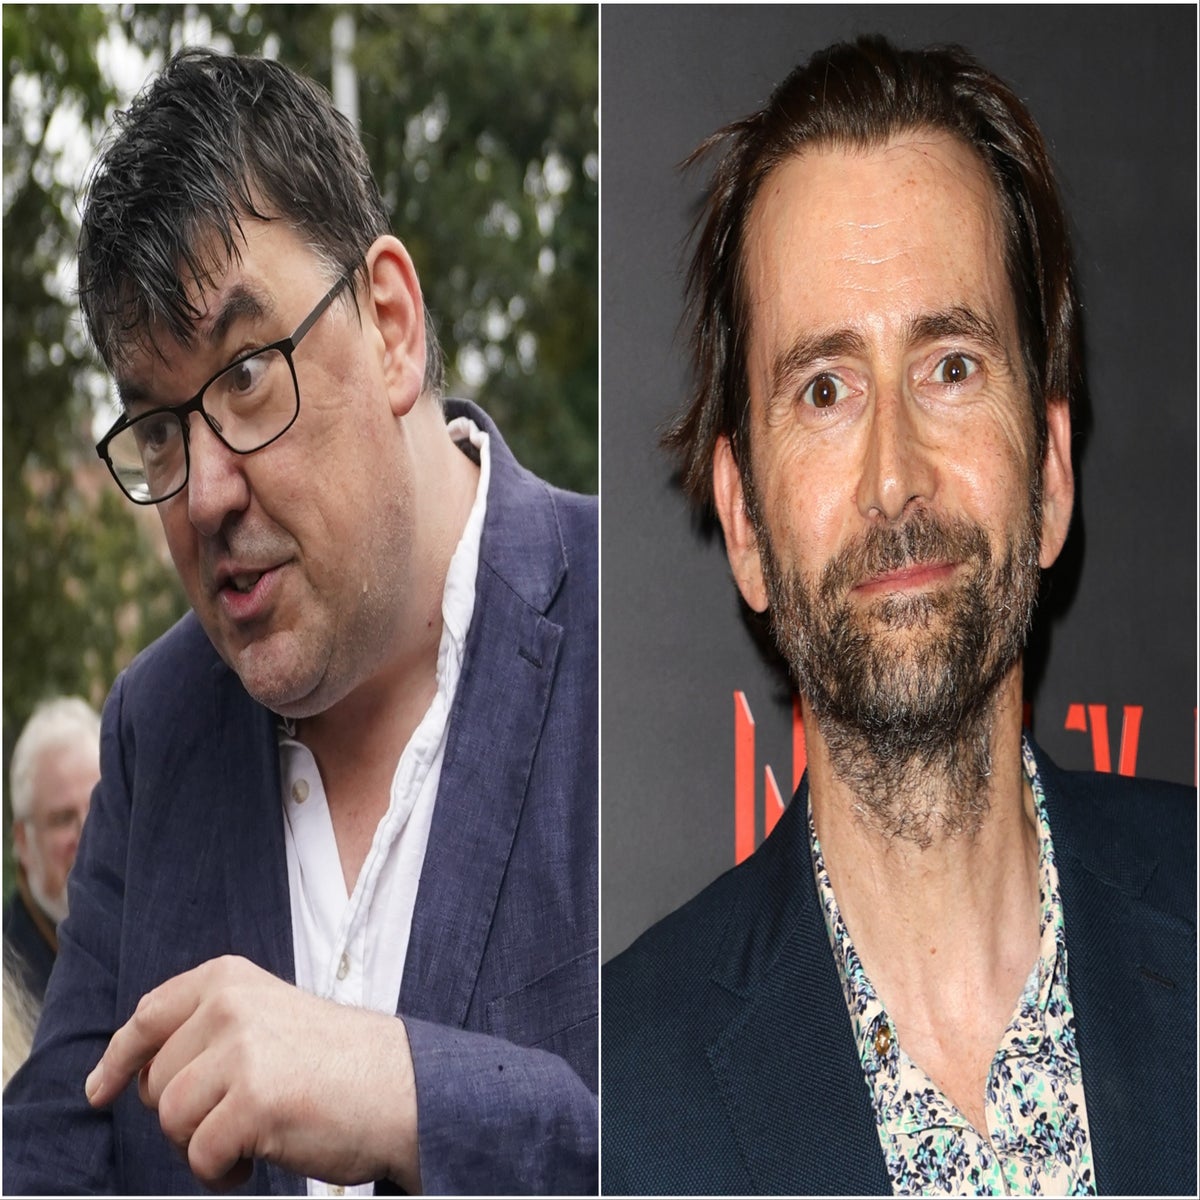 Graham Linehan ‘dropped by his agent’ after attacking Doctor Who star David Tennant over Tennant’s support for transgender rights (independent.co.uk)